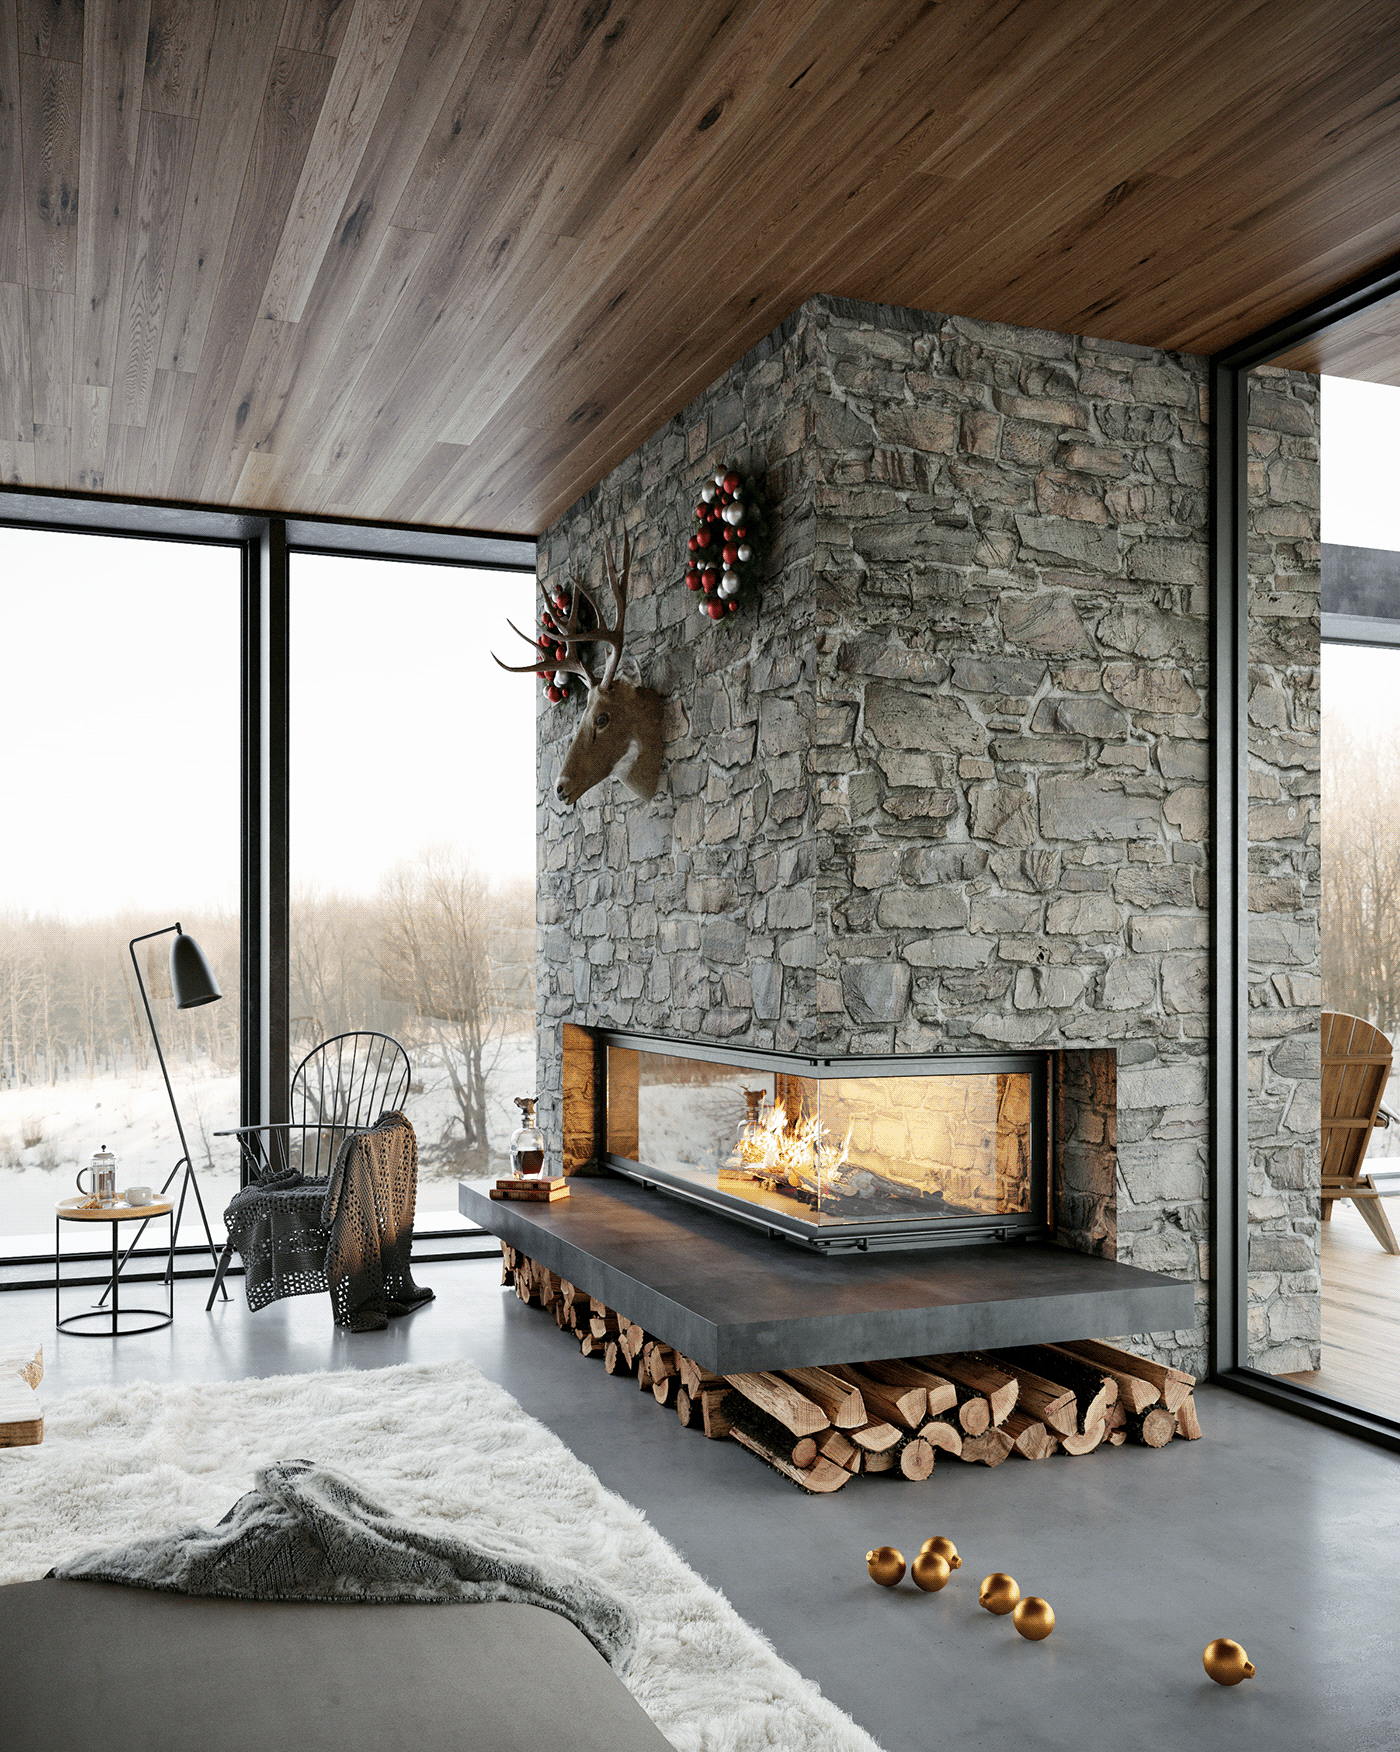 3D 3dsmax architecture CGI Christmas interiordesign photoshop Renders winter foresthouse